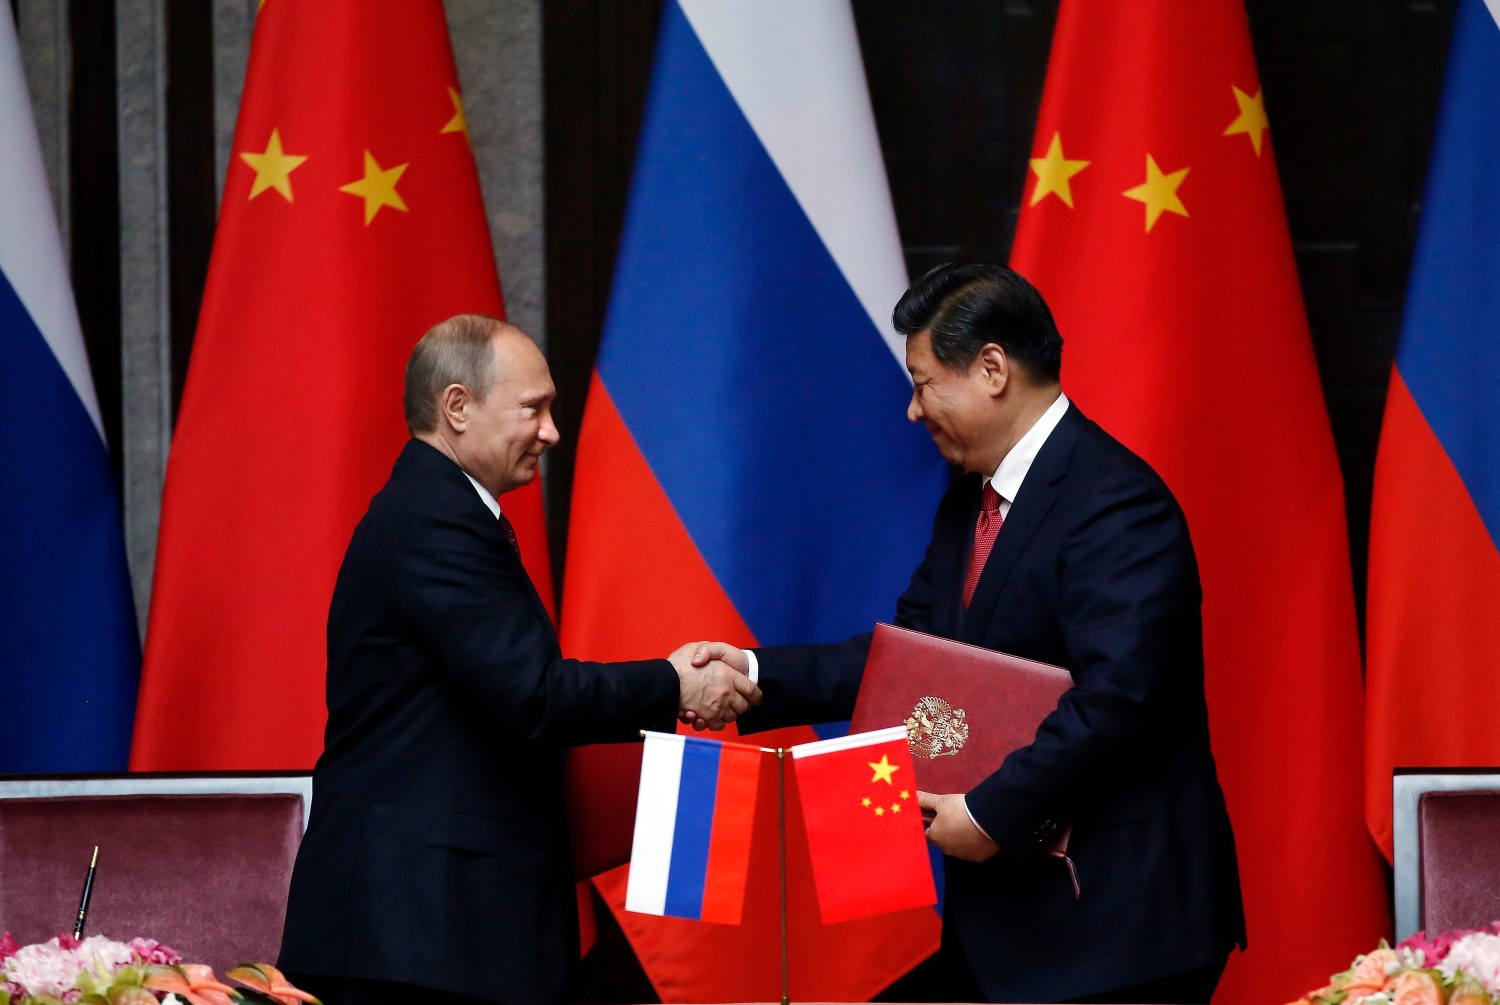 Russia's President Vladimir Putin (L) and China's President Xi Jinping shake hands after signing an agreement during a bilateral meeting at the Xijiao State Guesthouse ahead of the fourth Conference on Interaction and Confidence Building Measures in Asia (CICA) summit, in Shanghai May 20, 2014. Trade between China and Russia is expected to reach $100 billion by 2015, Xi said on Tuesday, after meeting with Putin. REUTERS/Carlos Barria  (CHINA - Tags: POLITICS BUSINESS) - GM1EA5K14XV01